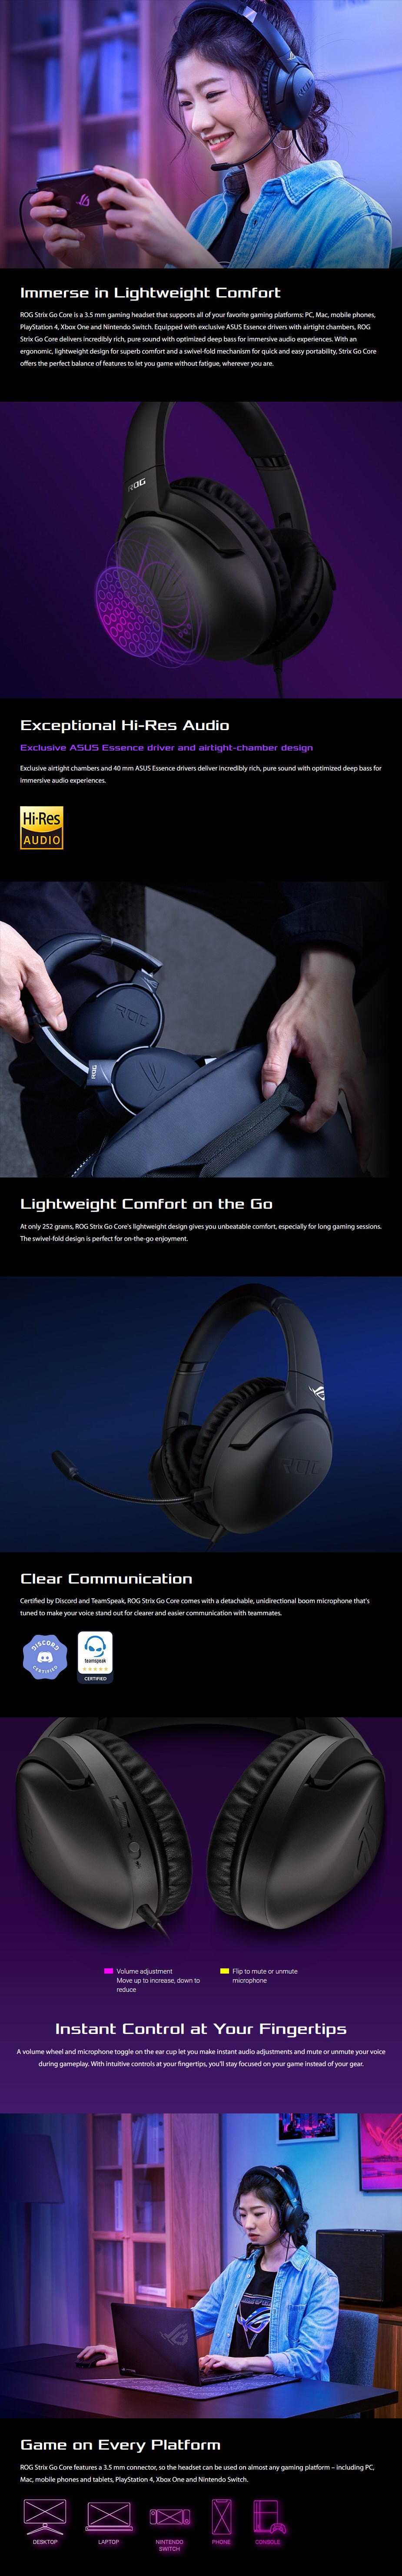 A large marketing image providing additional information about the product ASUS ROG STRIX GO CORE Multi-Platform Gaming Headset - Additional alt info not provided